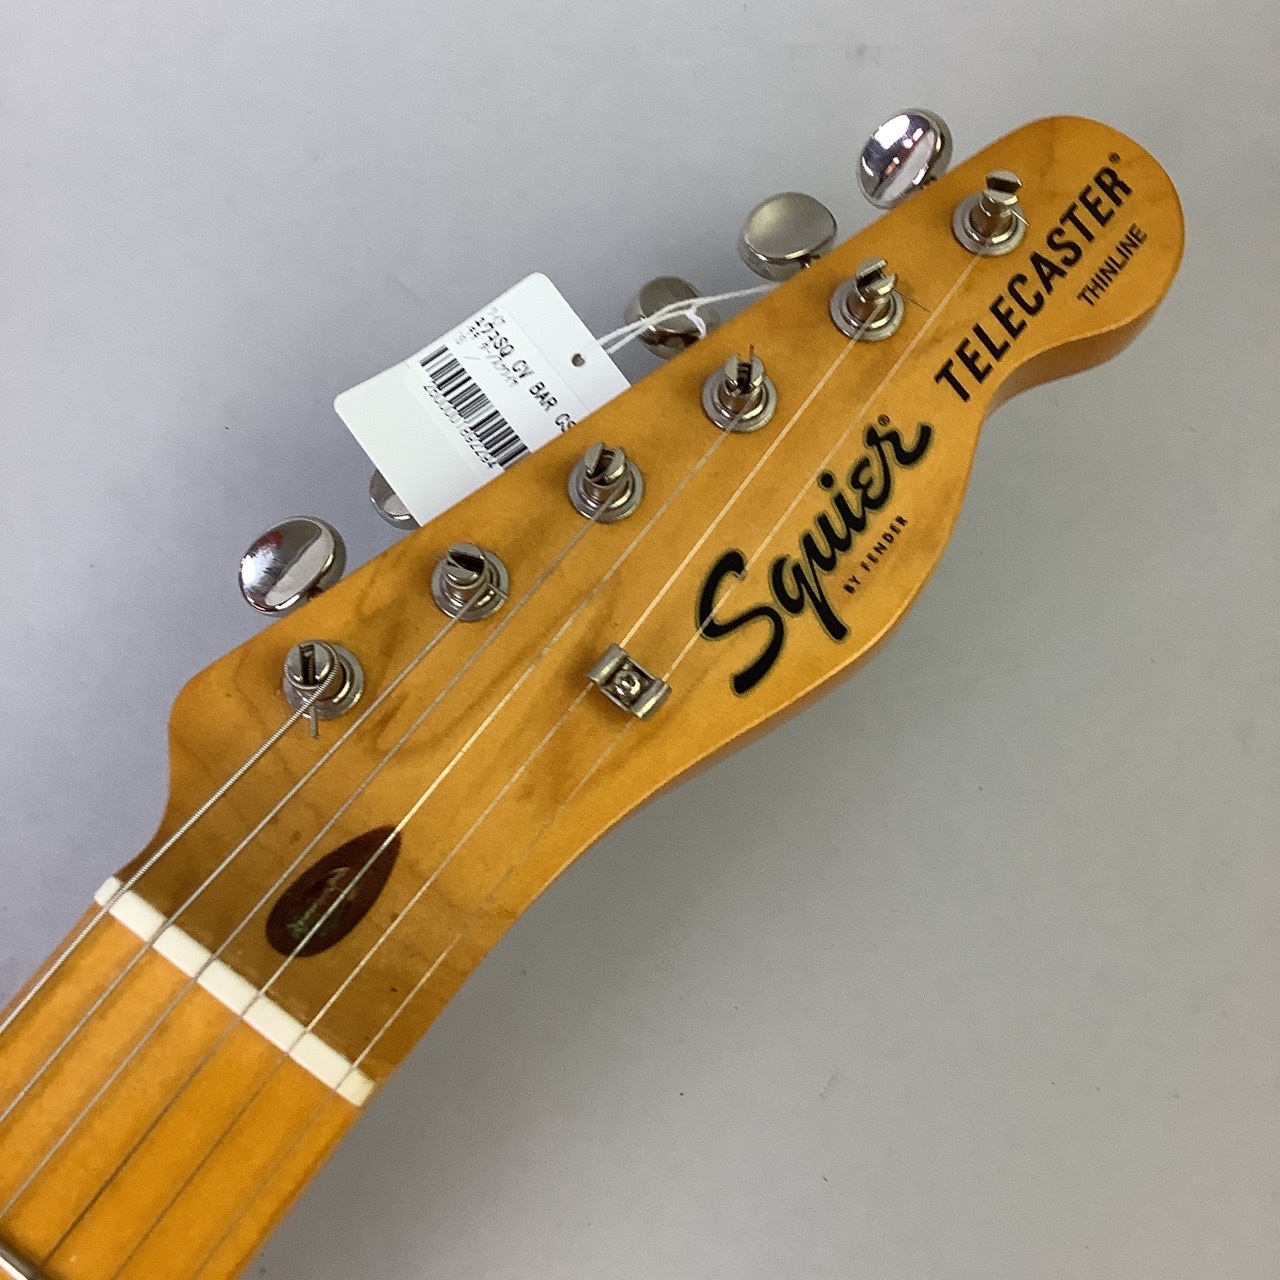 Squier by Fender Classic Vibe '70s Telecaster Thinline（中古/送料